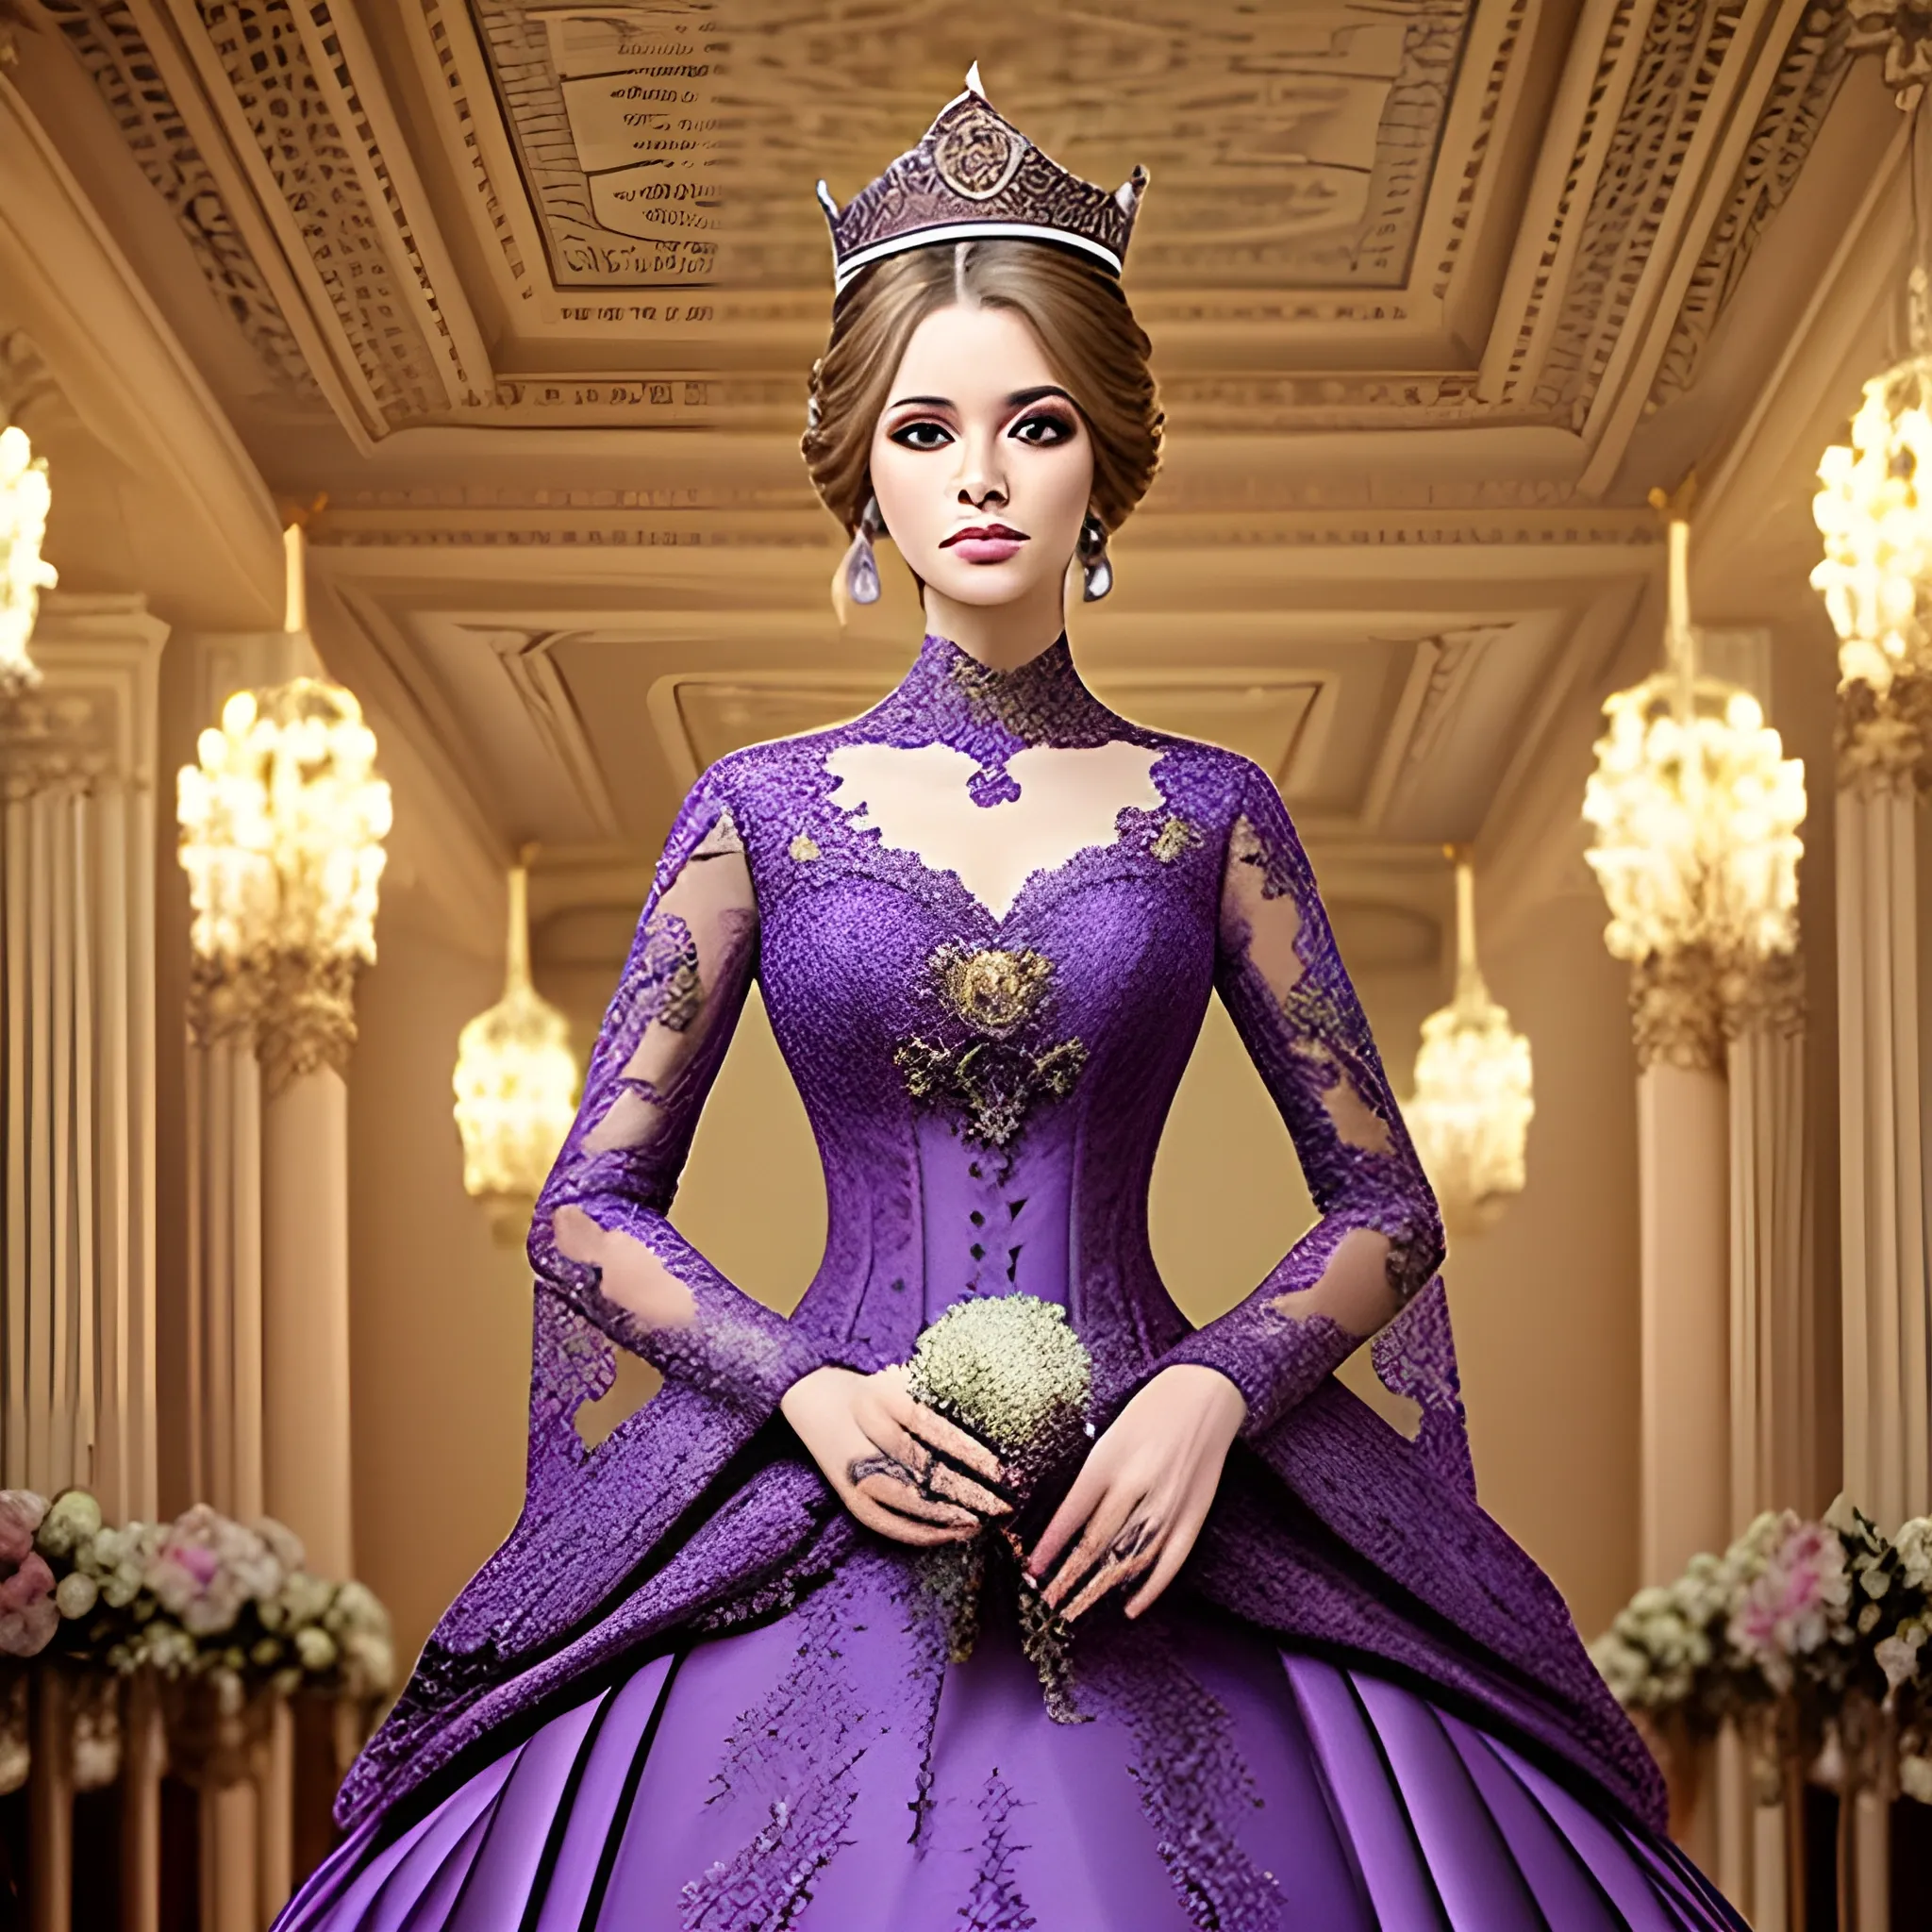 Intricate fantasy wedding gown purple and gold lace goddess train empress sleeves crown style extravagant lace detail, Water Color